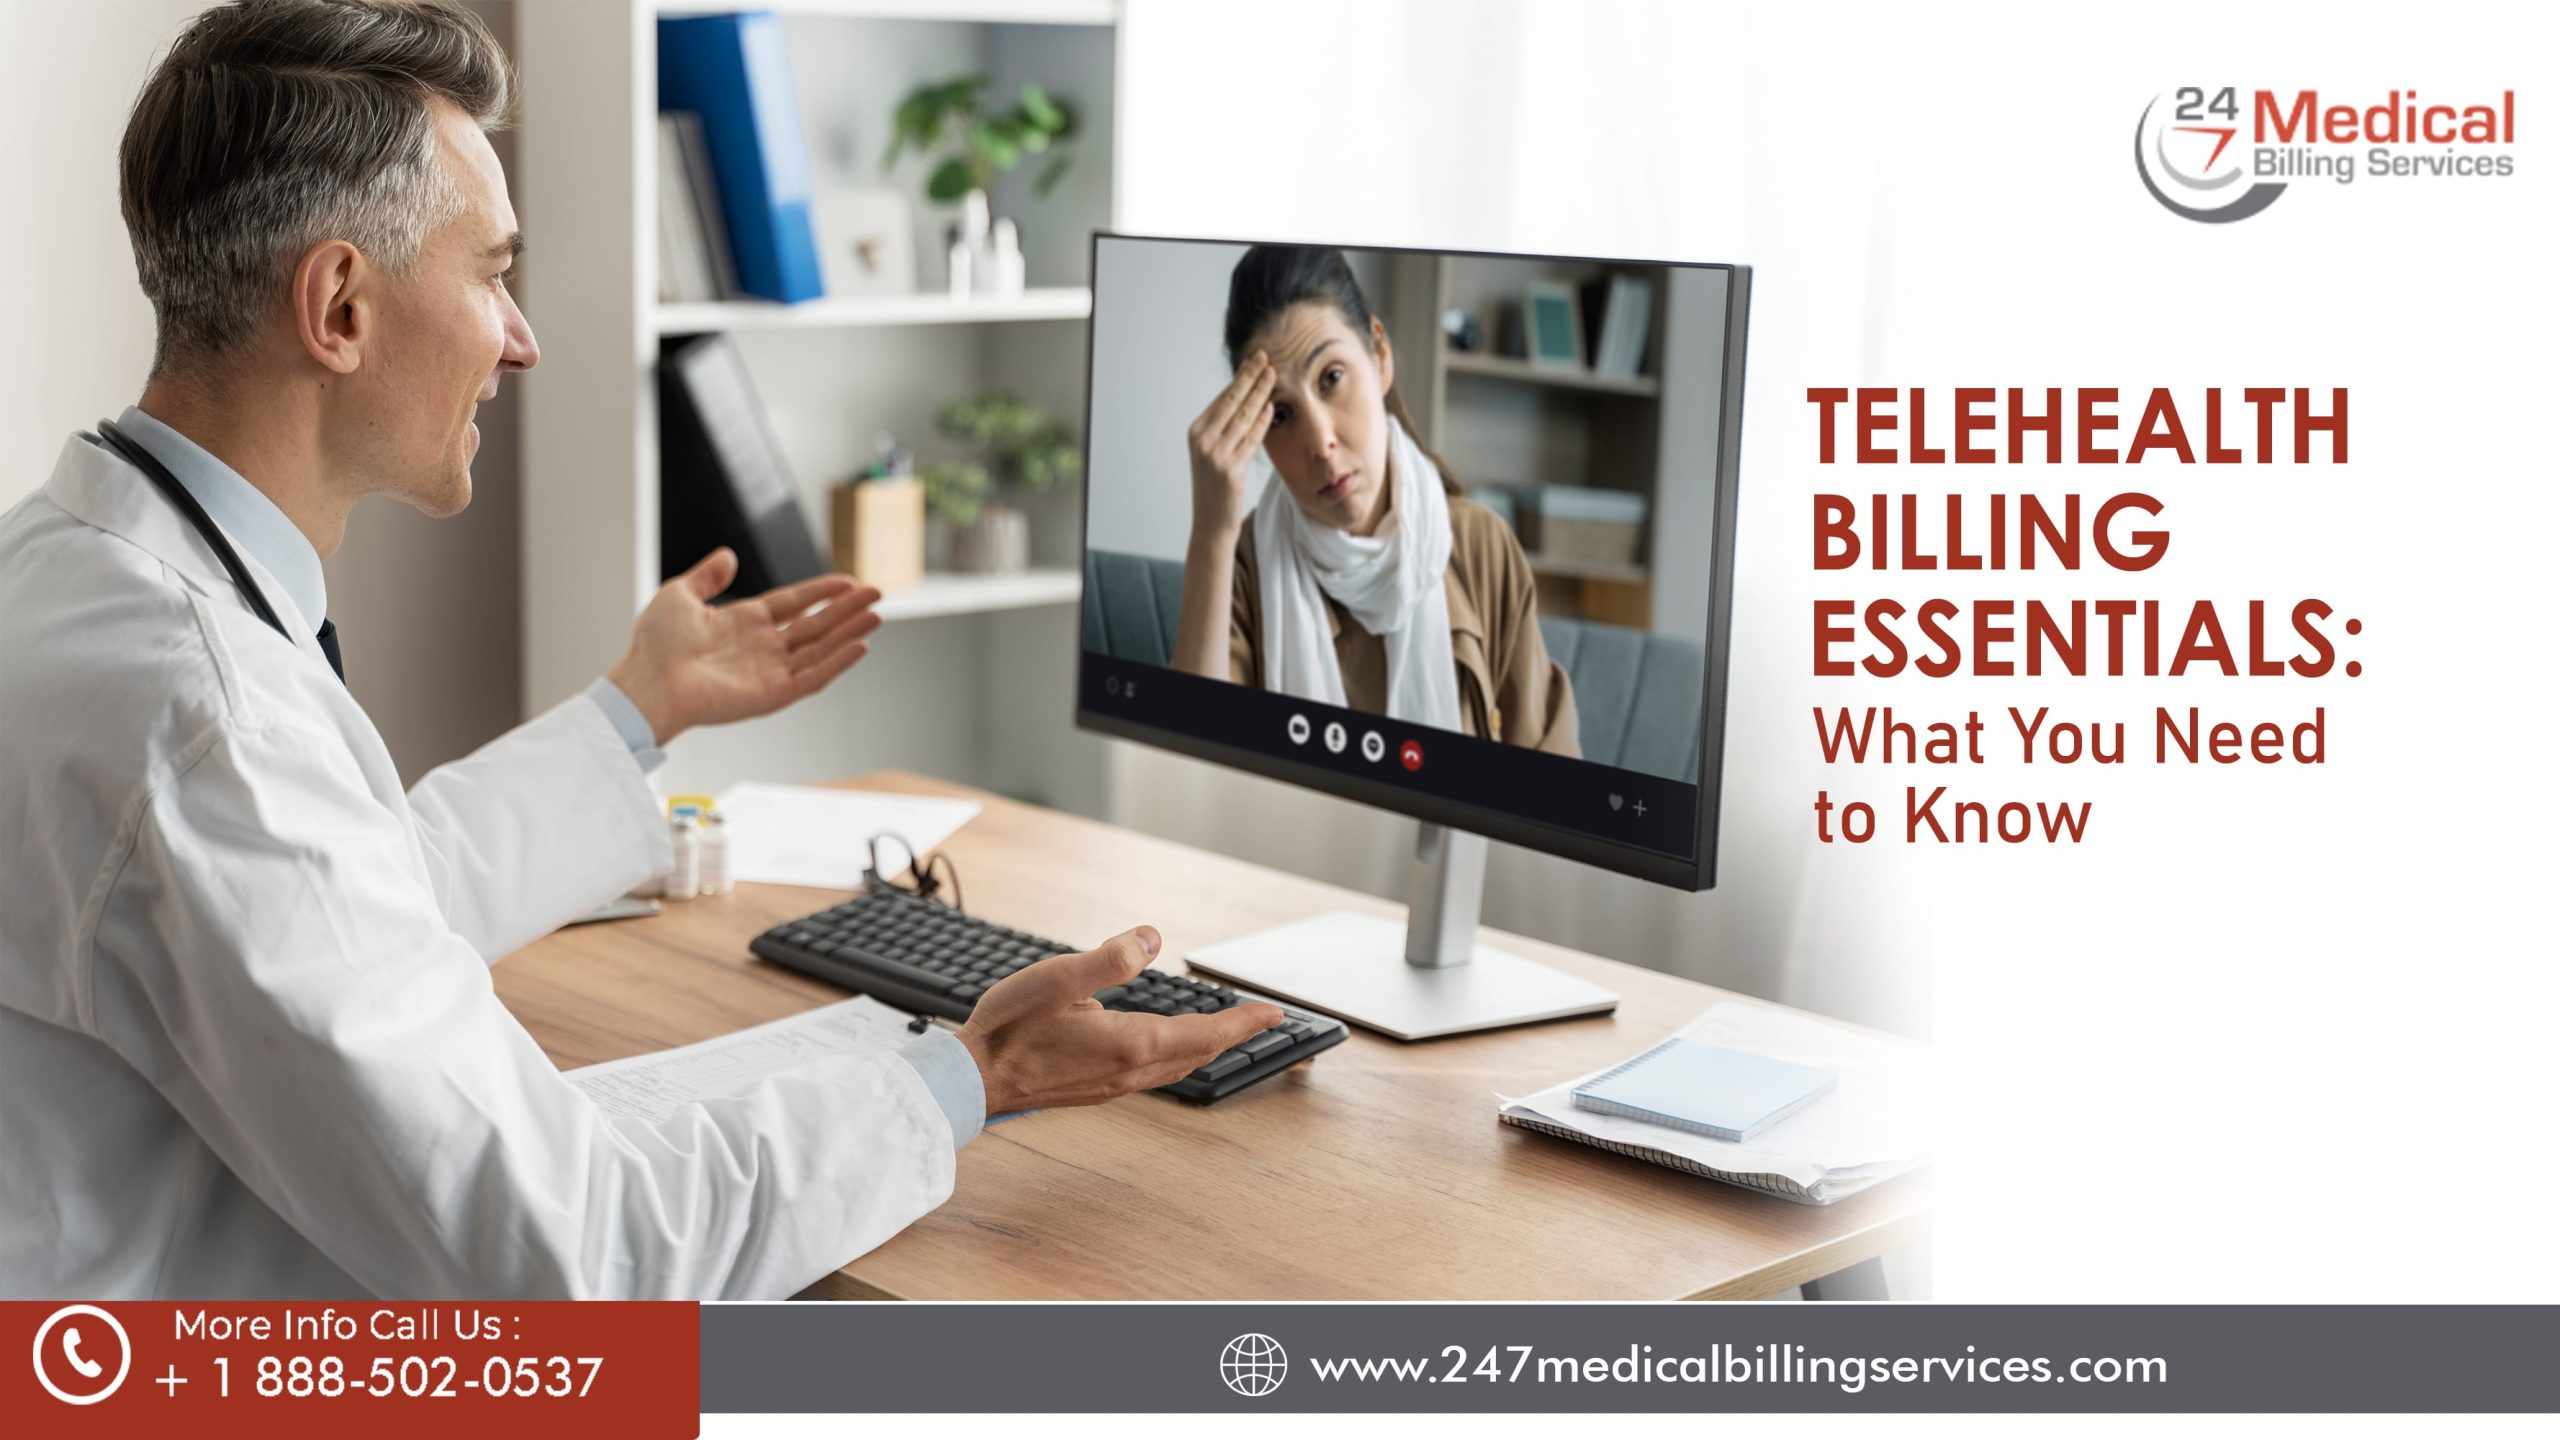  Telehealth Billing Essentials: What You Need to Know